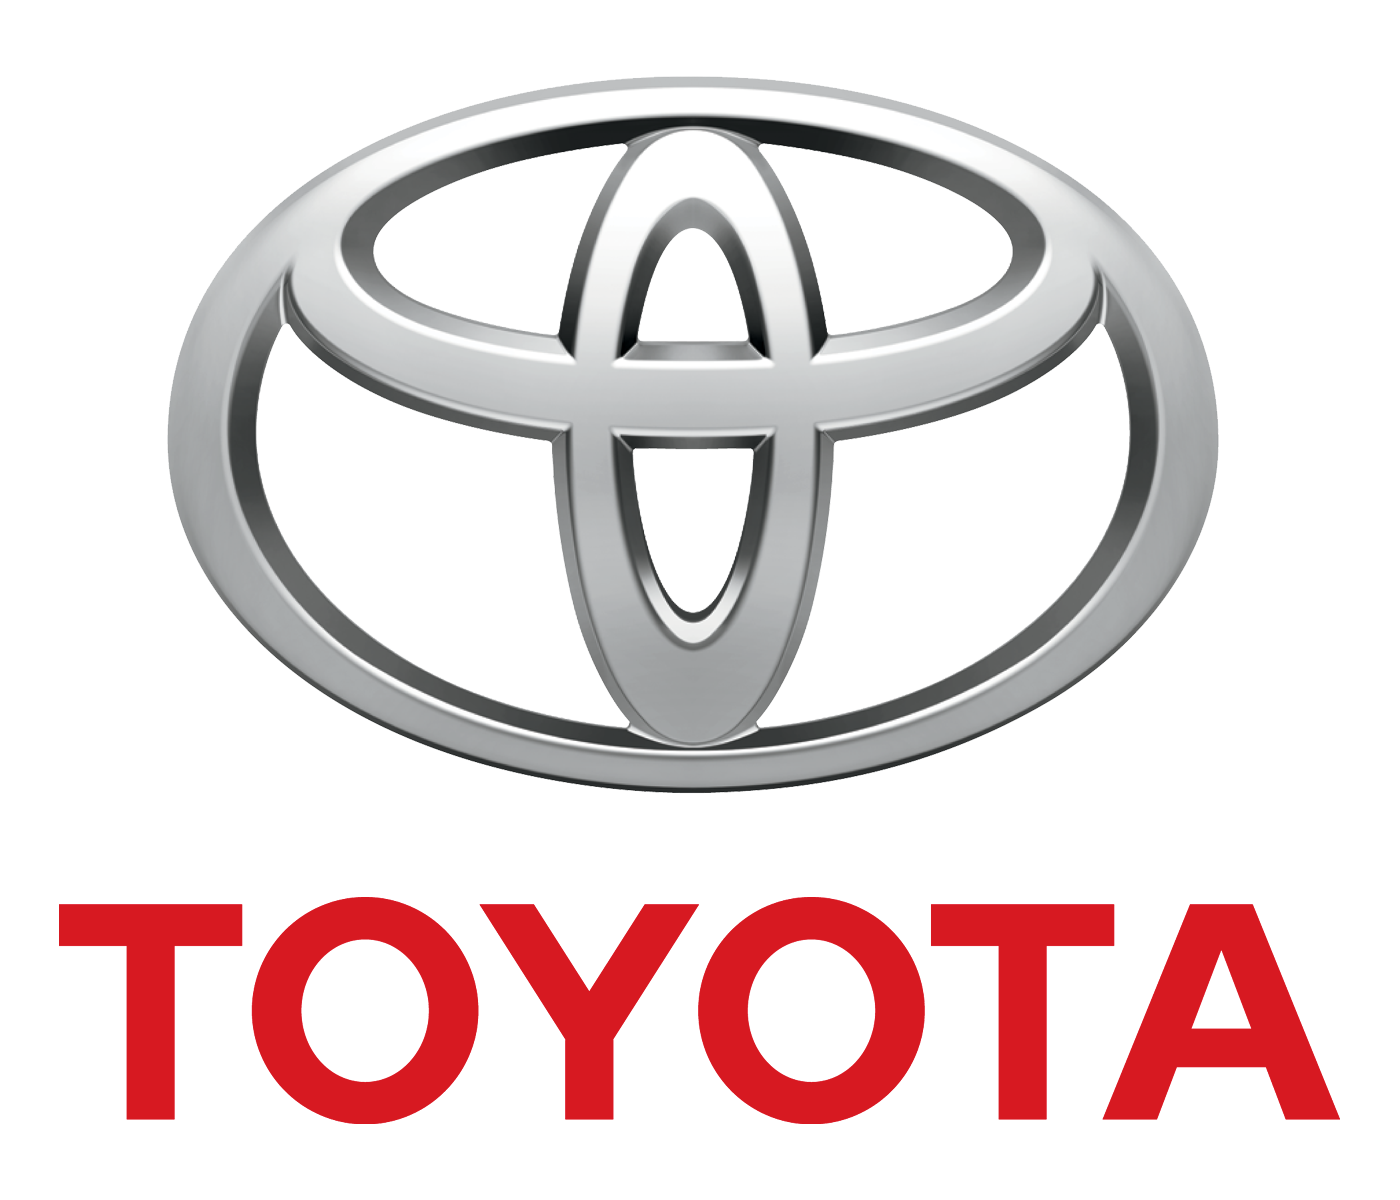 Read more about: Toyota